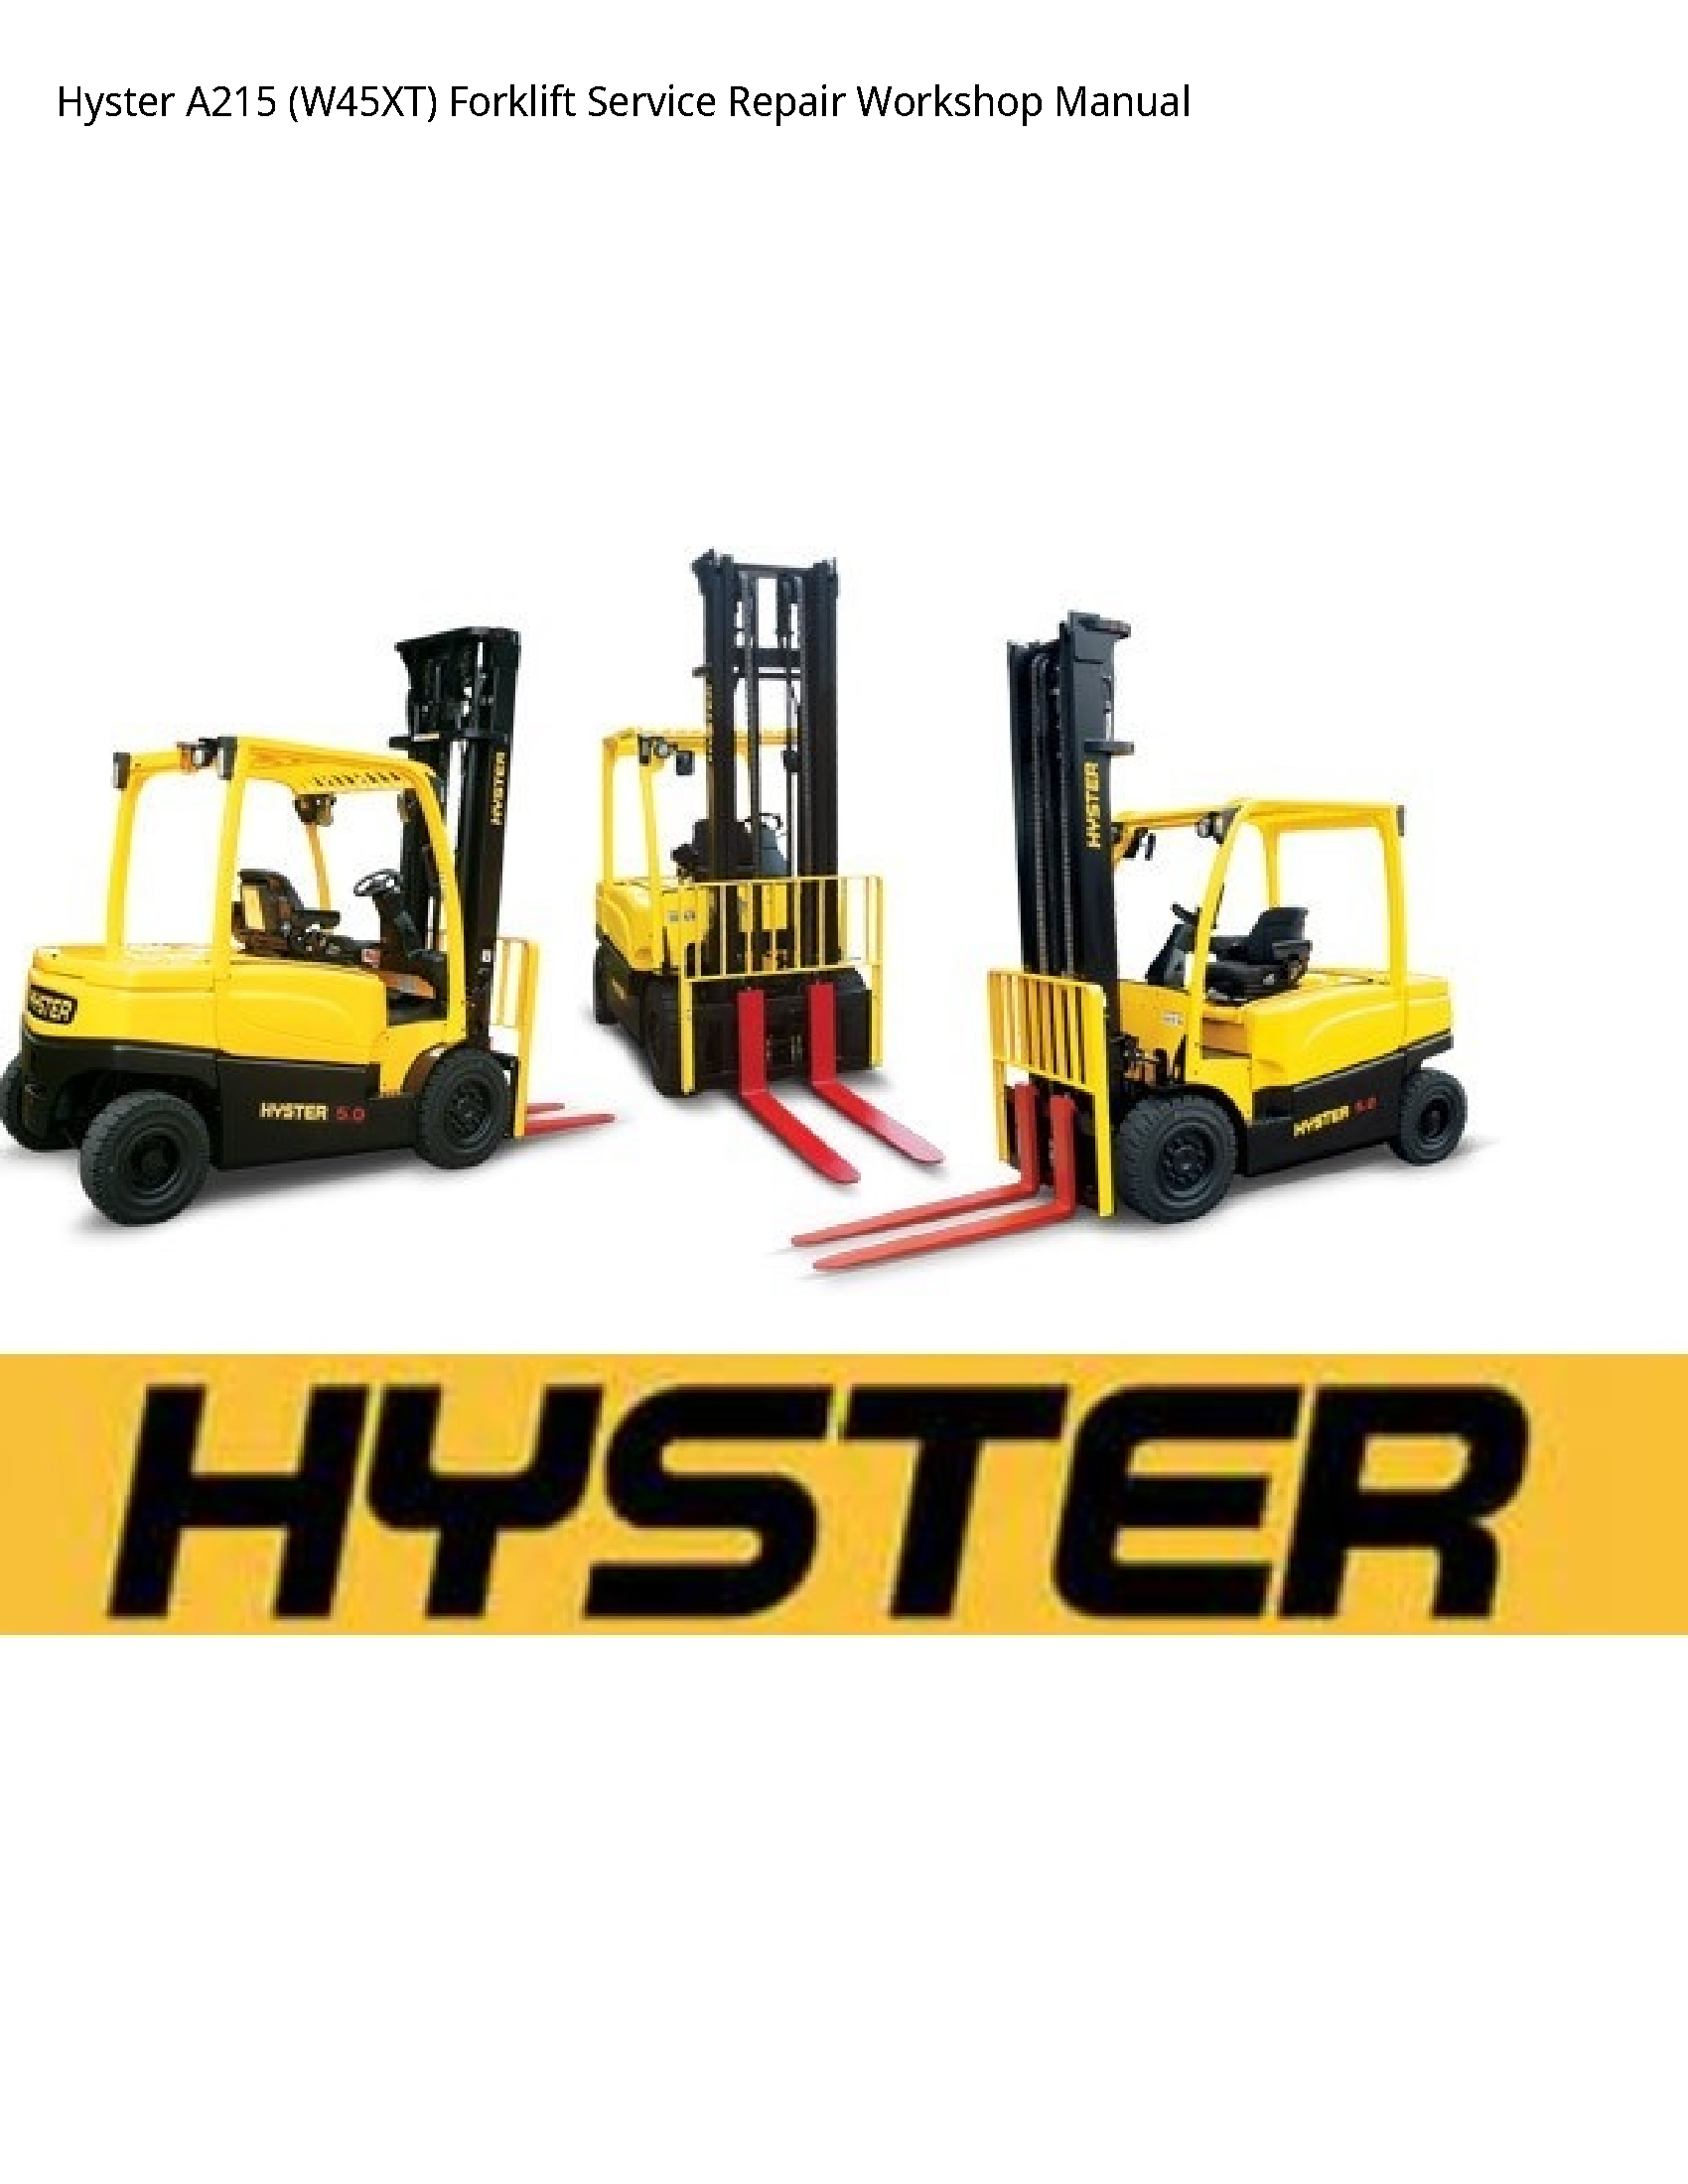 Hyster A215 Forklift manual